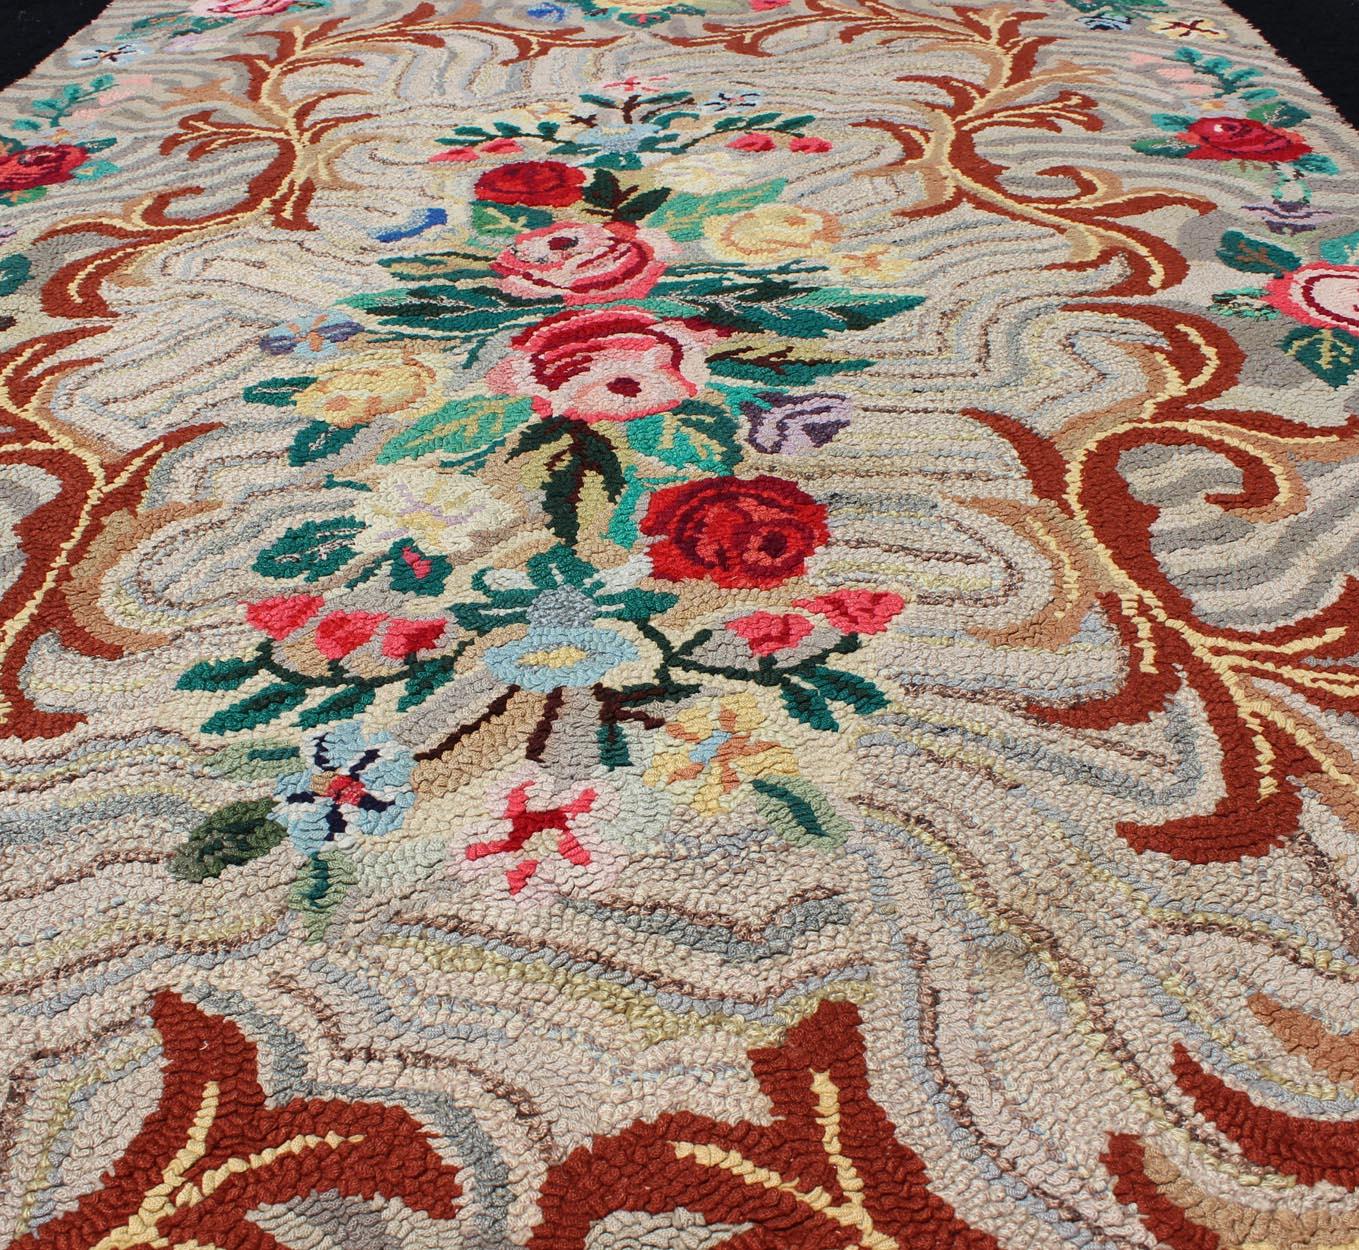 Hand-Woven Charcoal, Red, and Green Antique American Hooked Rug with Large Flower Design For Sale